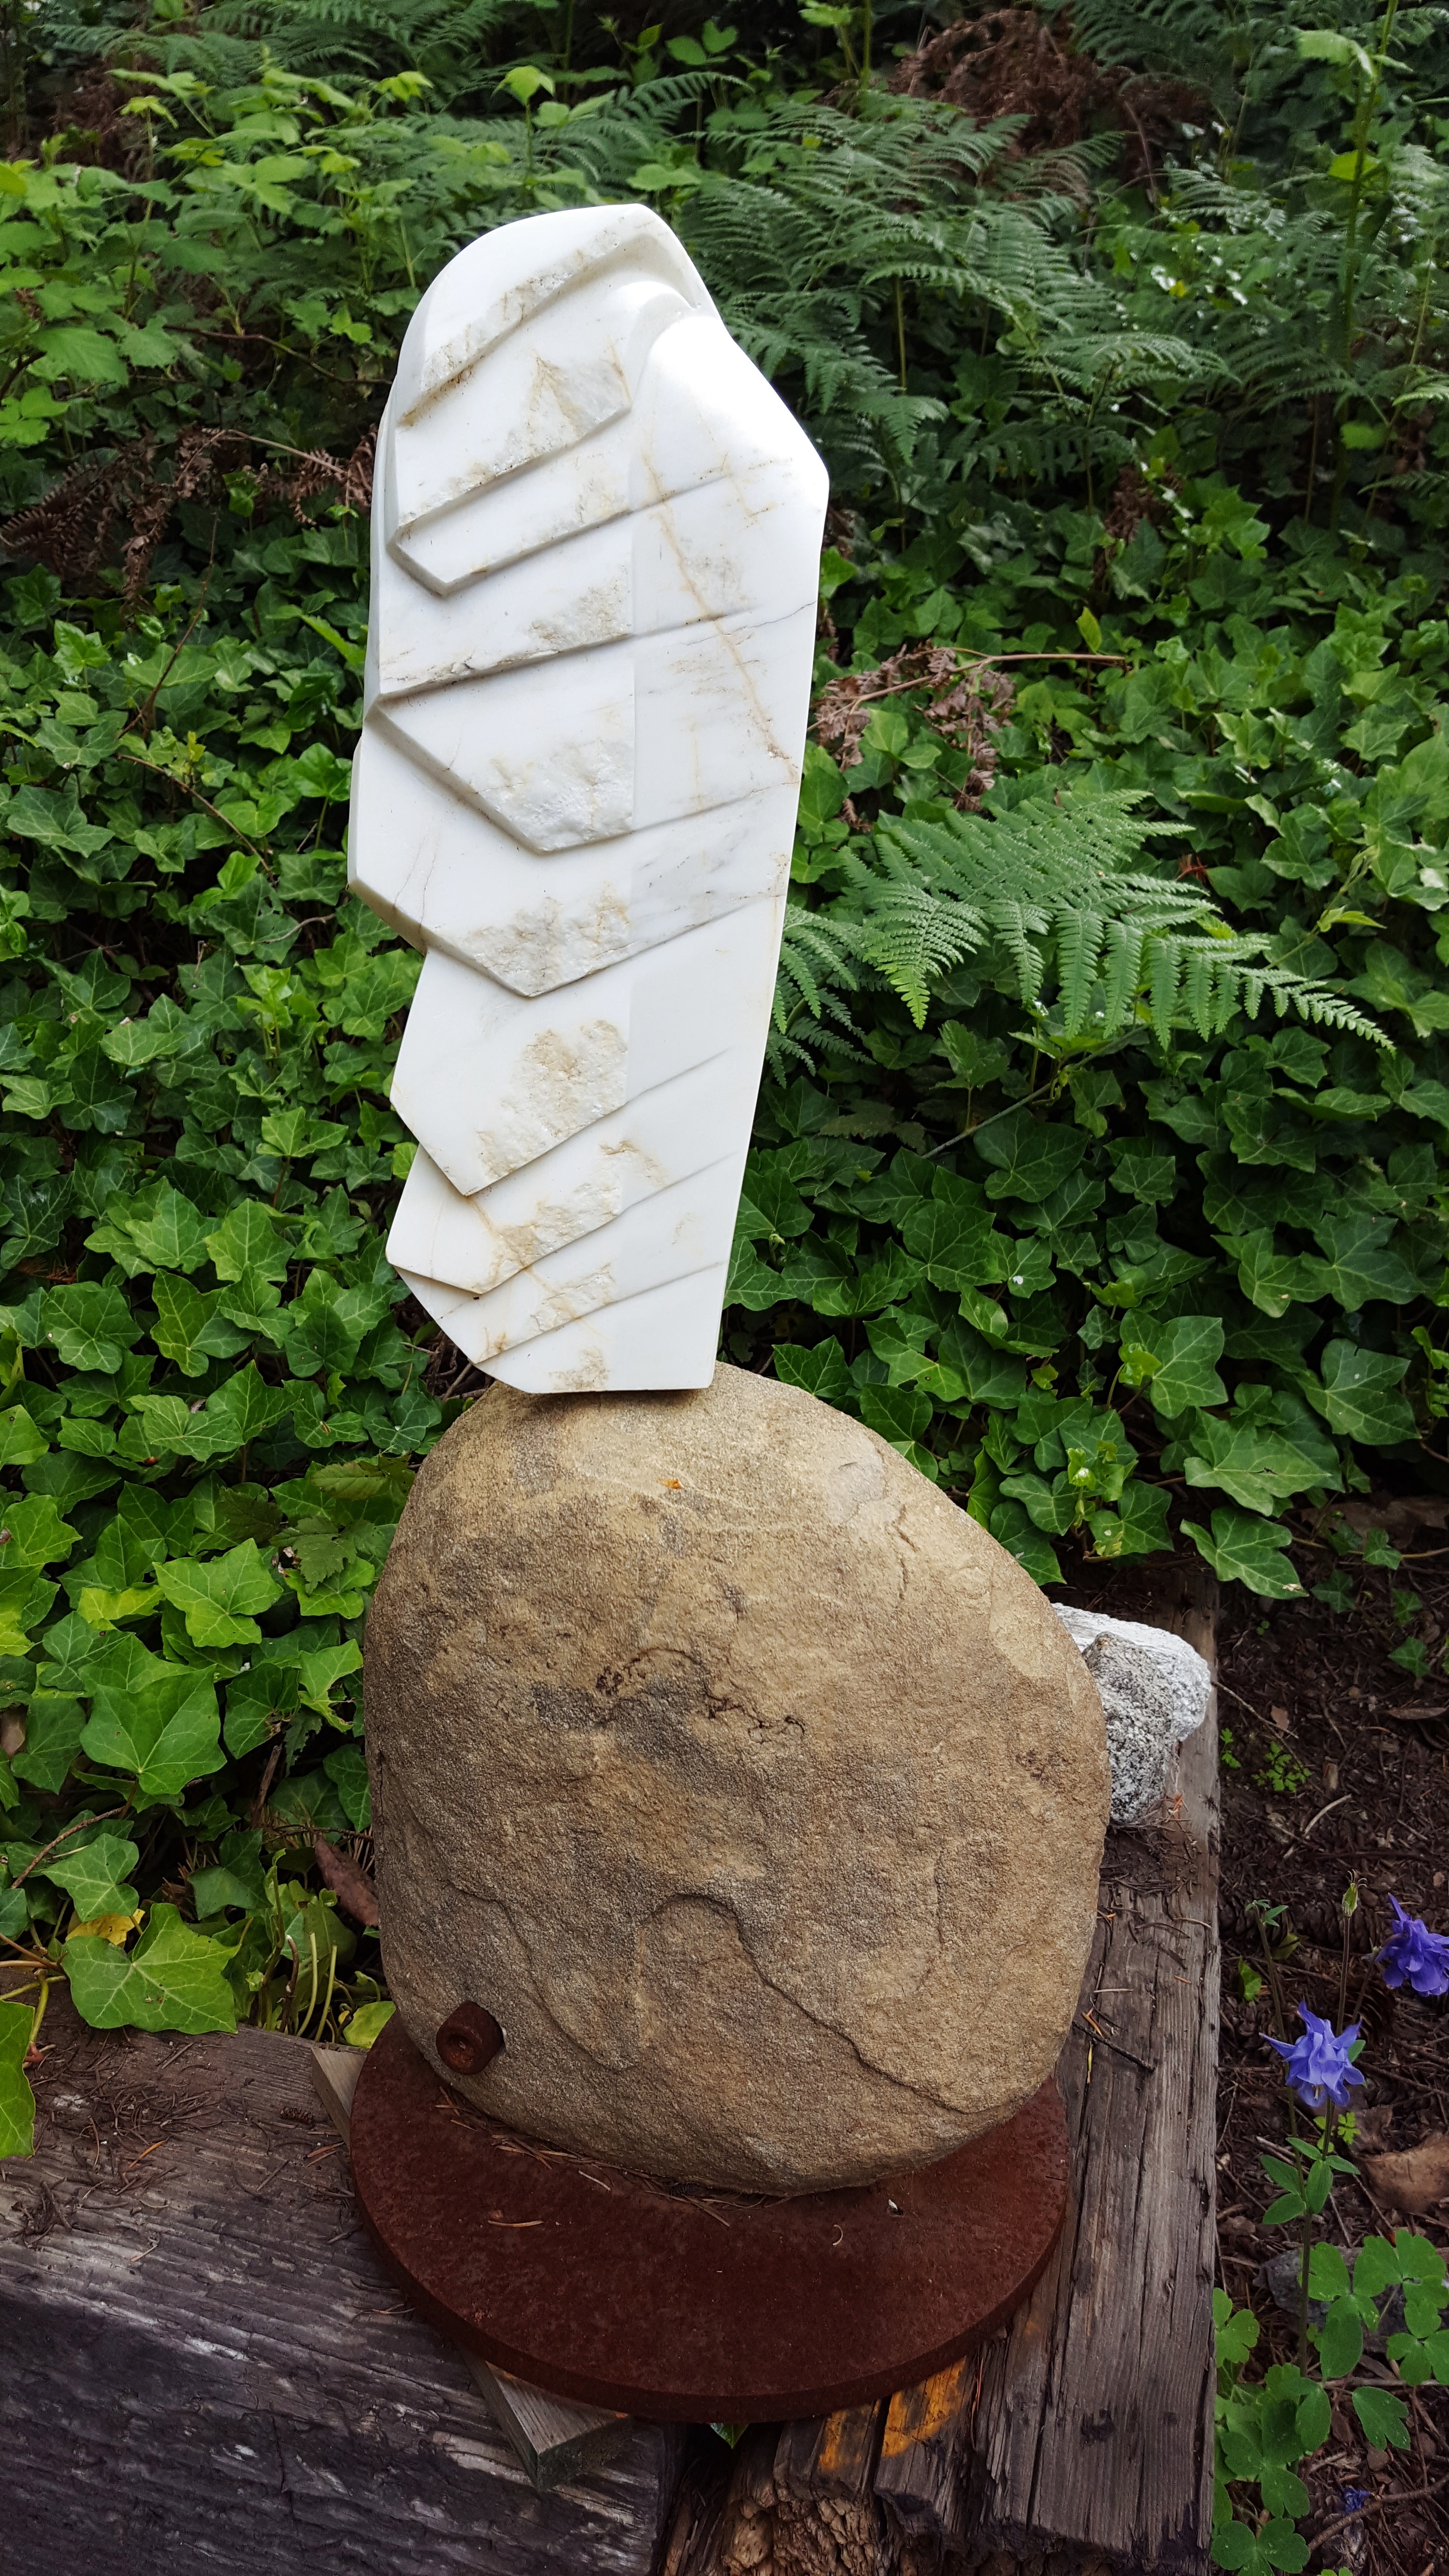 "Feather", 29” X 12” X 6”, marble, stone, steel, 2015